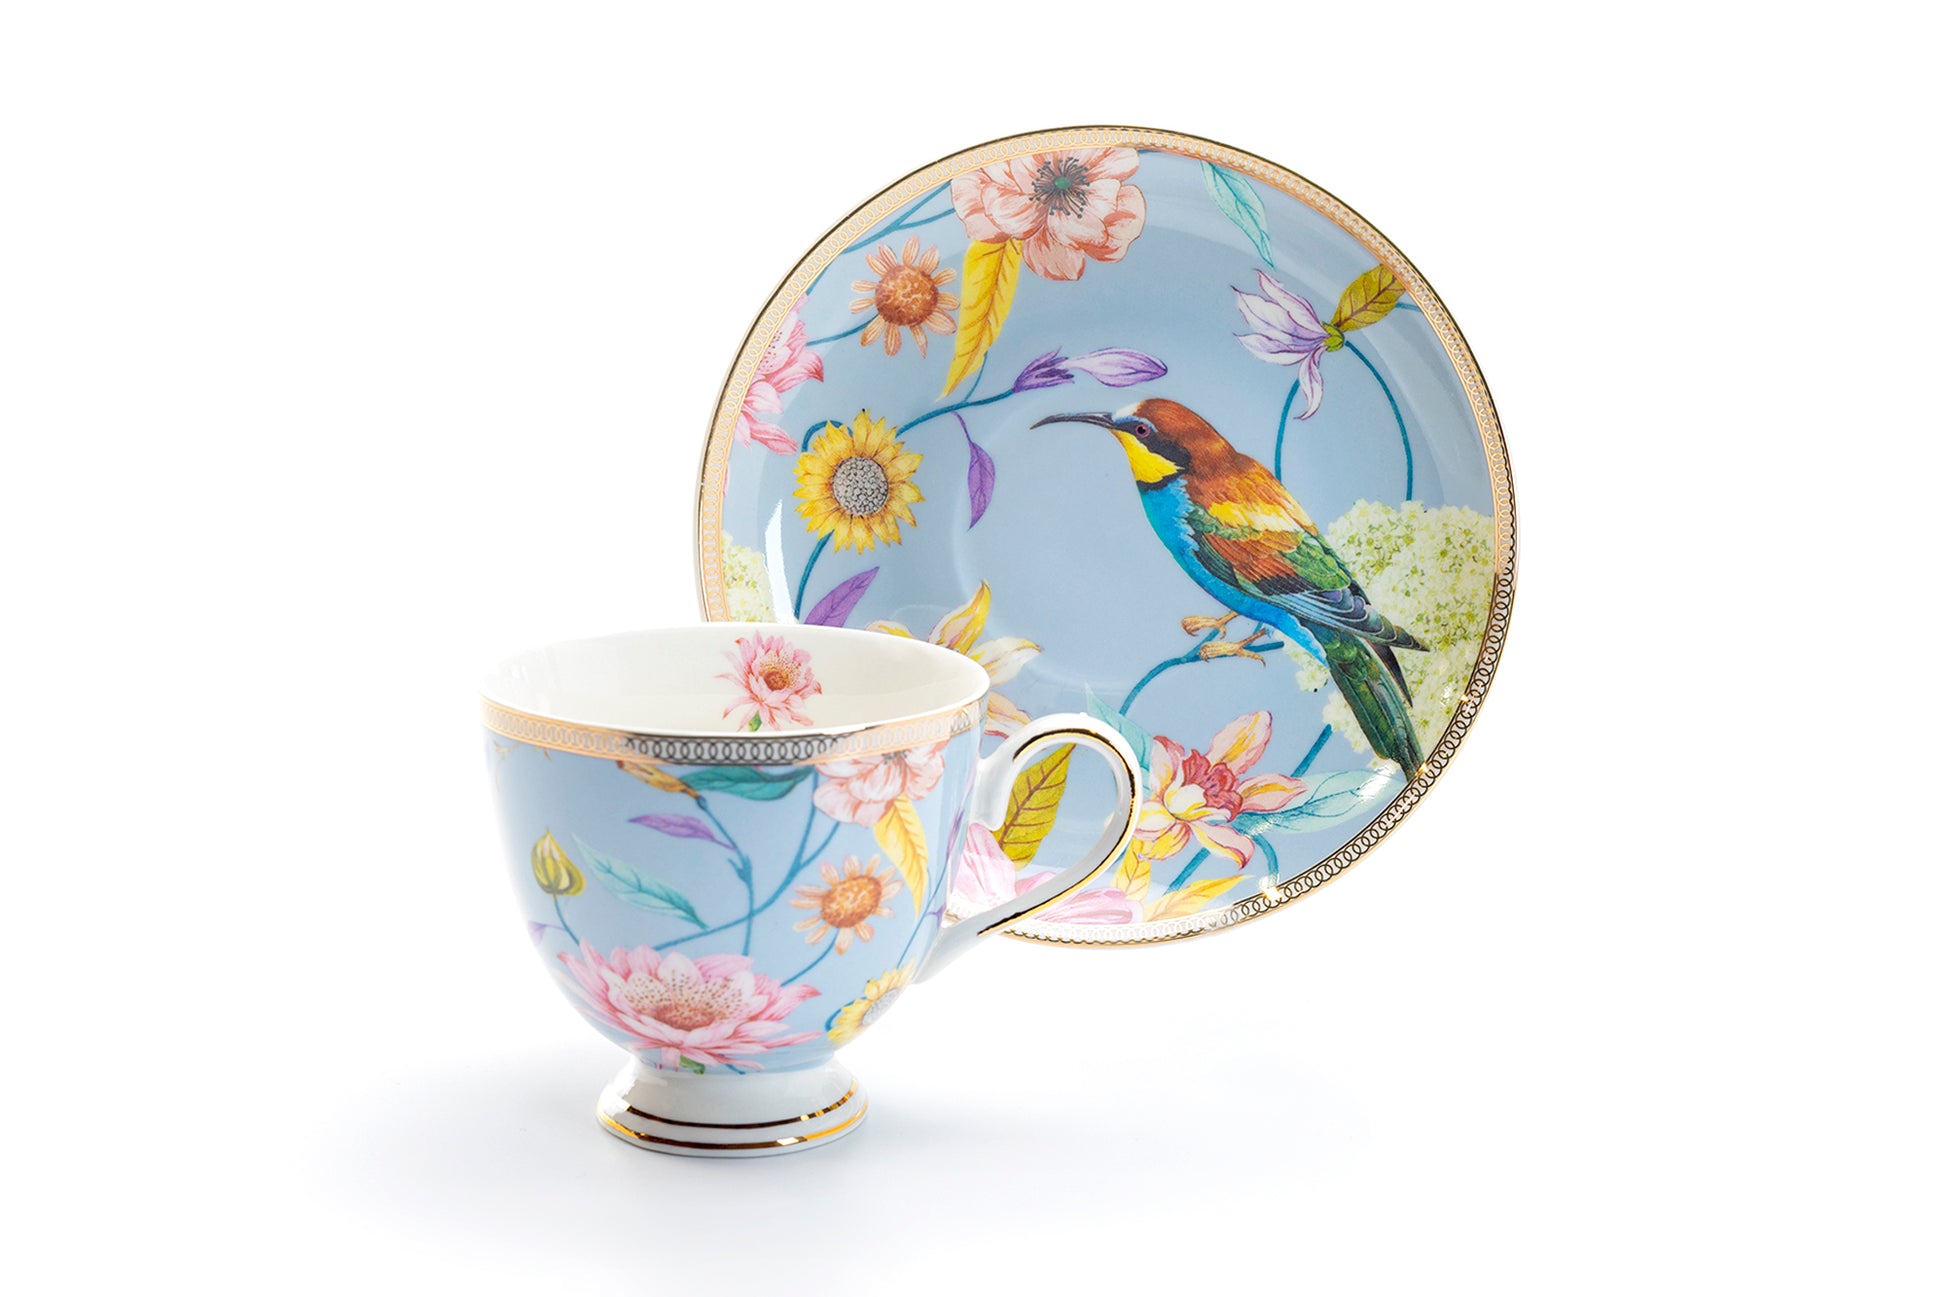 Spring Flowers with Bird Fine Porcelain Latte Cup and Saucer, Set of 1 (1 Cup with 1 Saucer)